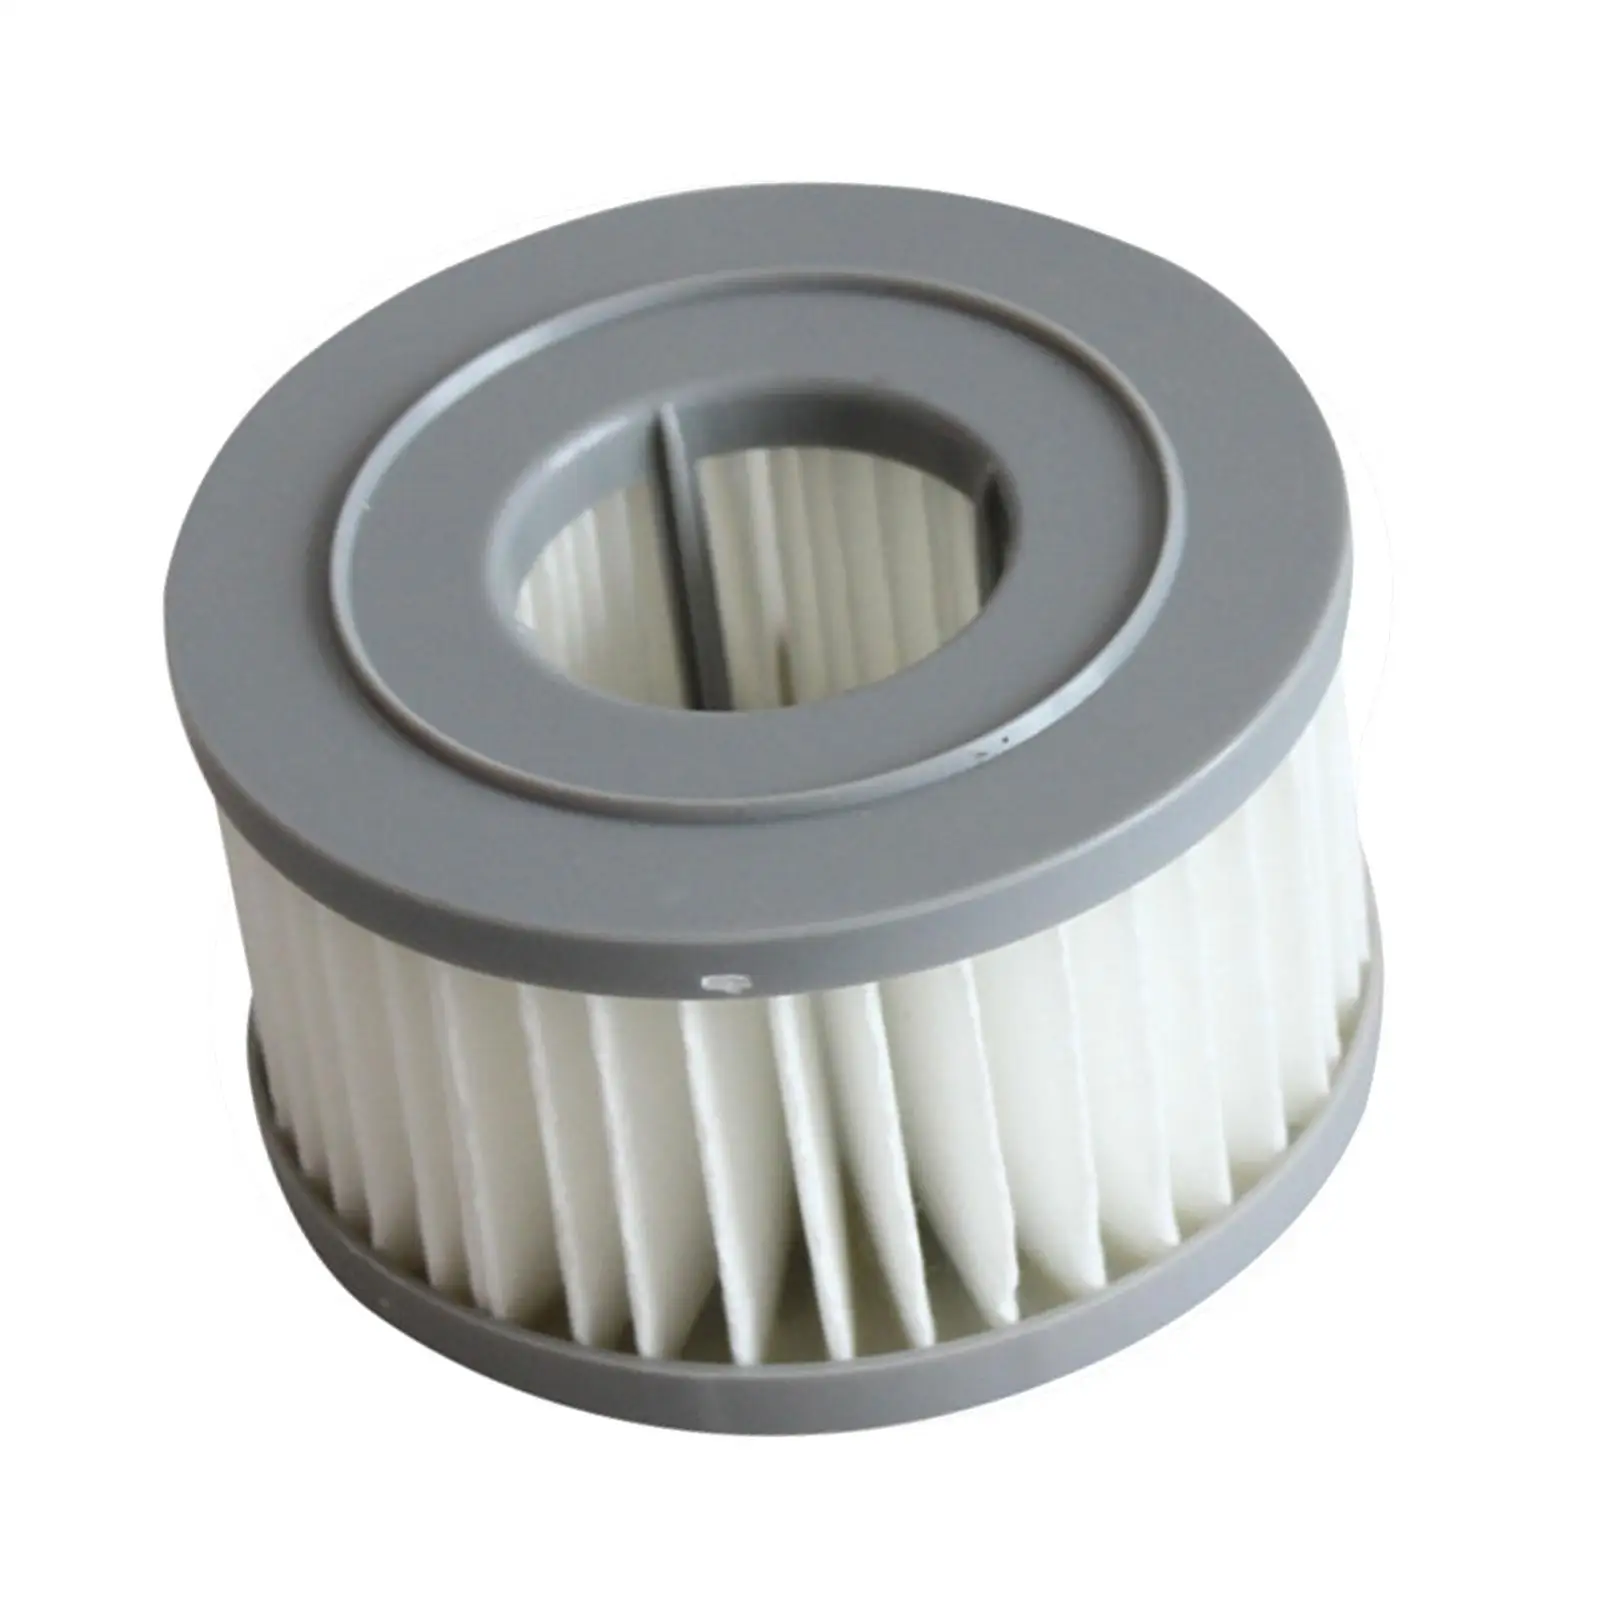 

Vacuum Filter Accessories Vacuum Cleaner Accessories Spare Part Fitments Vacuum Cleaner Filter Element for Jv85 Jv85Pro A6 A8 A7